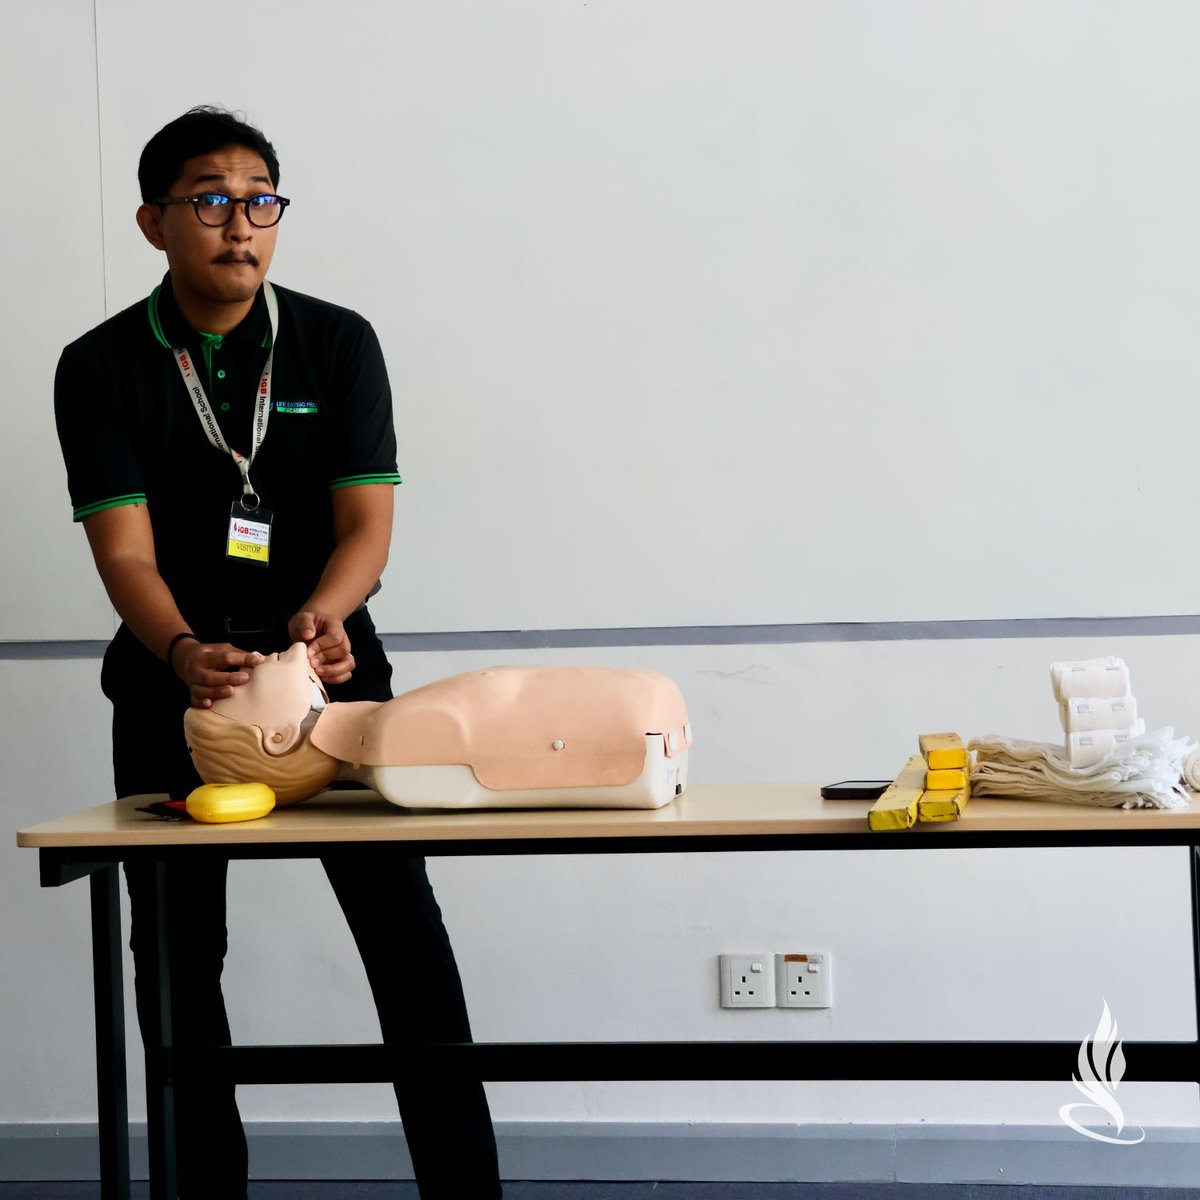 🏫❤️ The #IGBIS community is dedicated to ensuring the #Safety and #Wellbeing of our school community. Recently, our teachers and staff completed a #FirstAid training. Together, we remain steadfast in our dedication to nurturing both knowledge and safety.